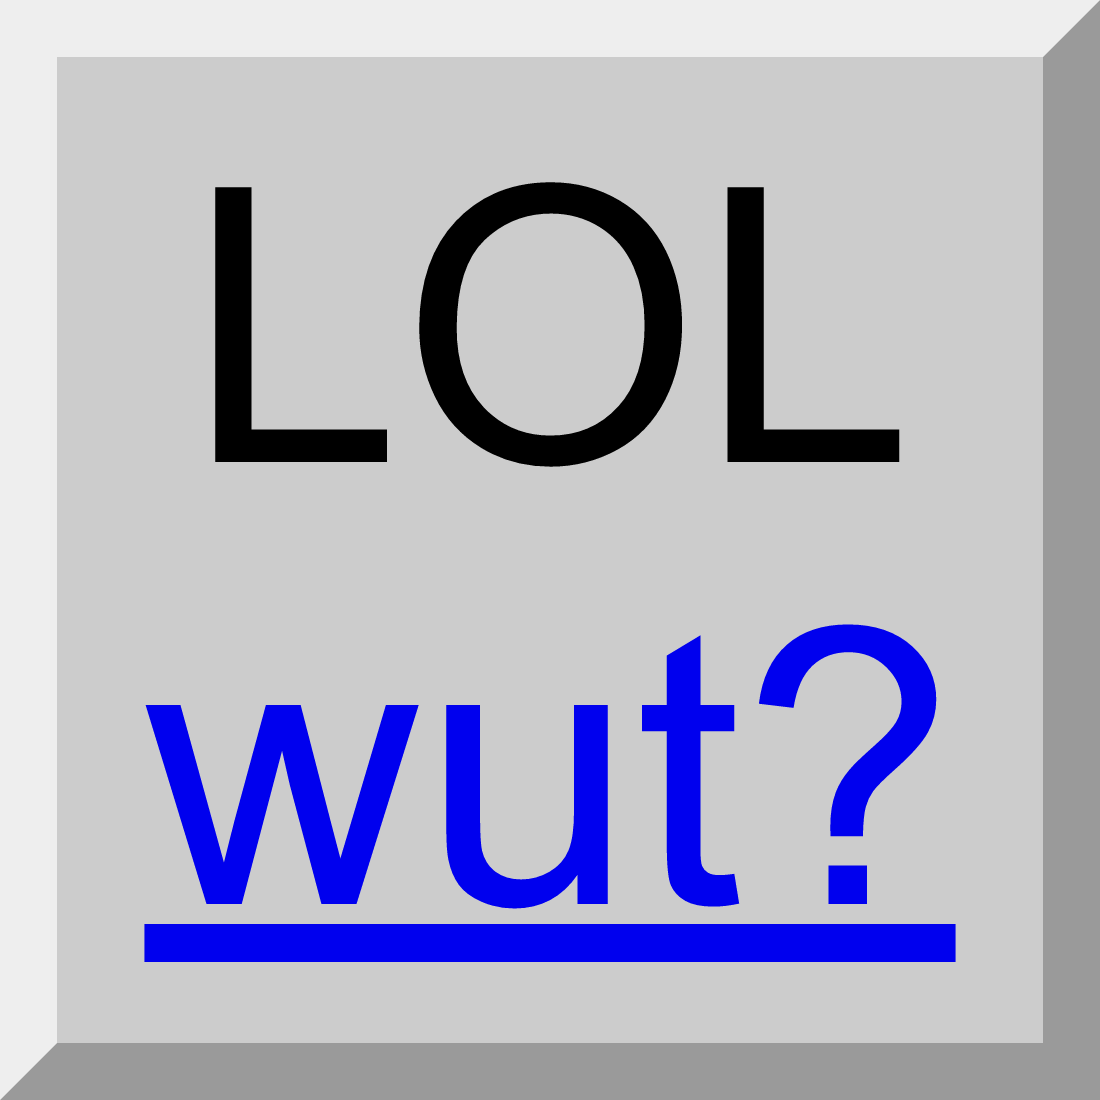 Screen capture of a button element with a hyperlink nested inside. Button text is “LOL” and link text is “wut?”